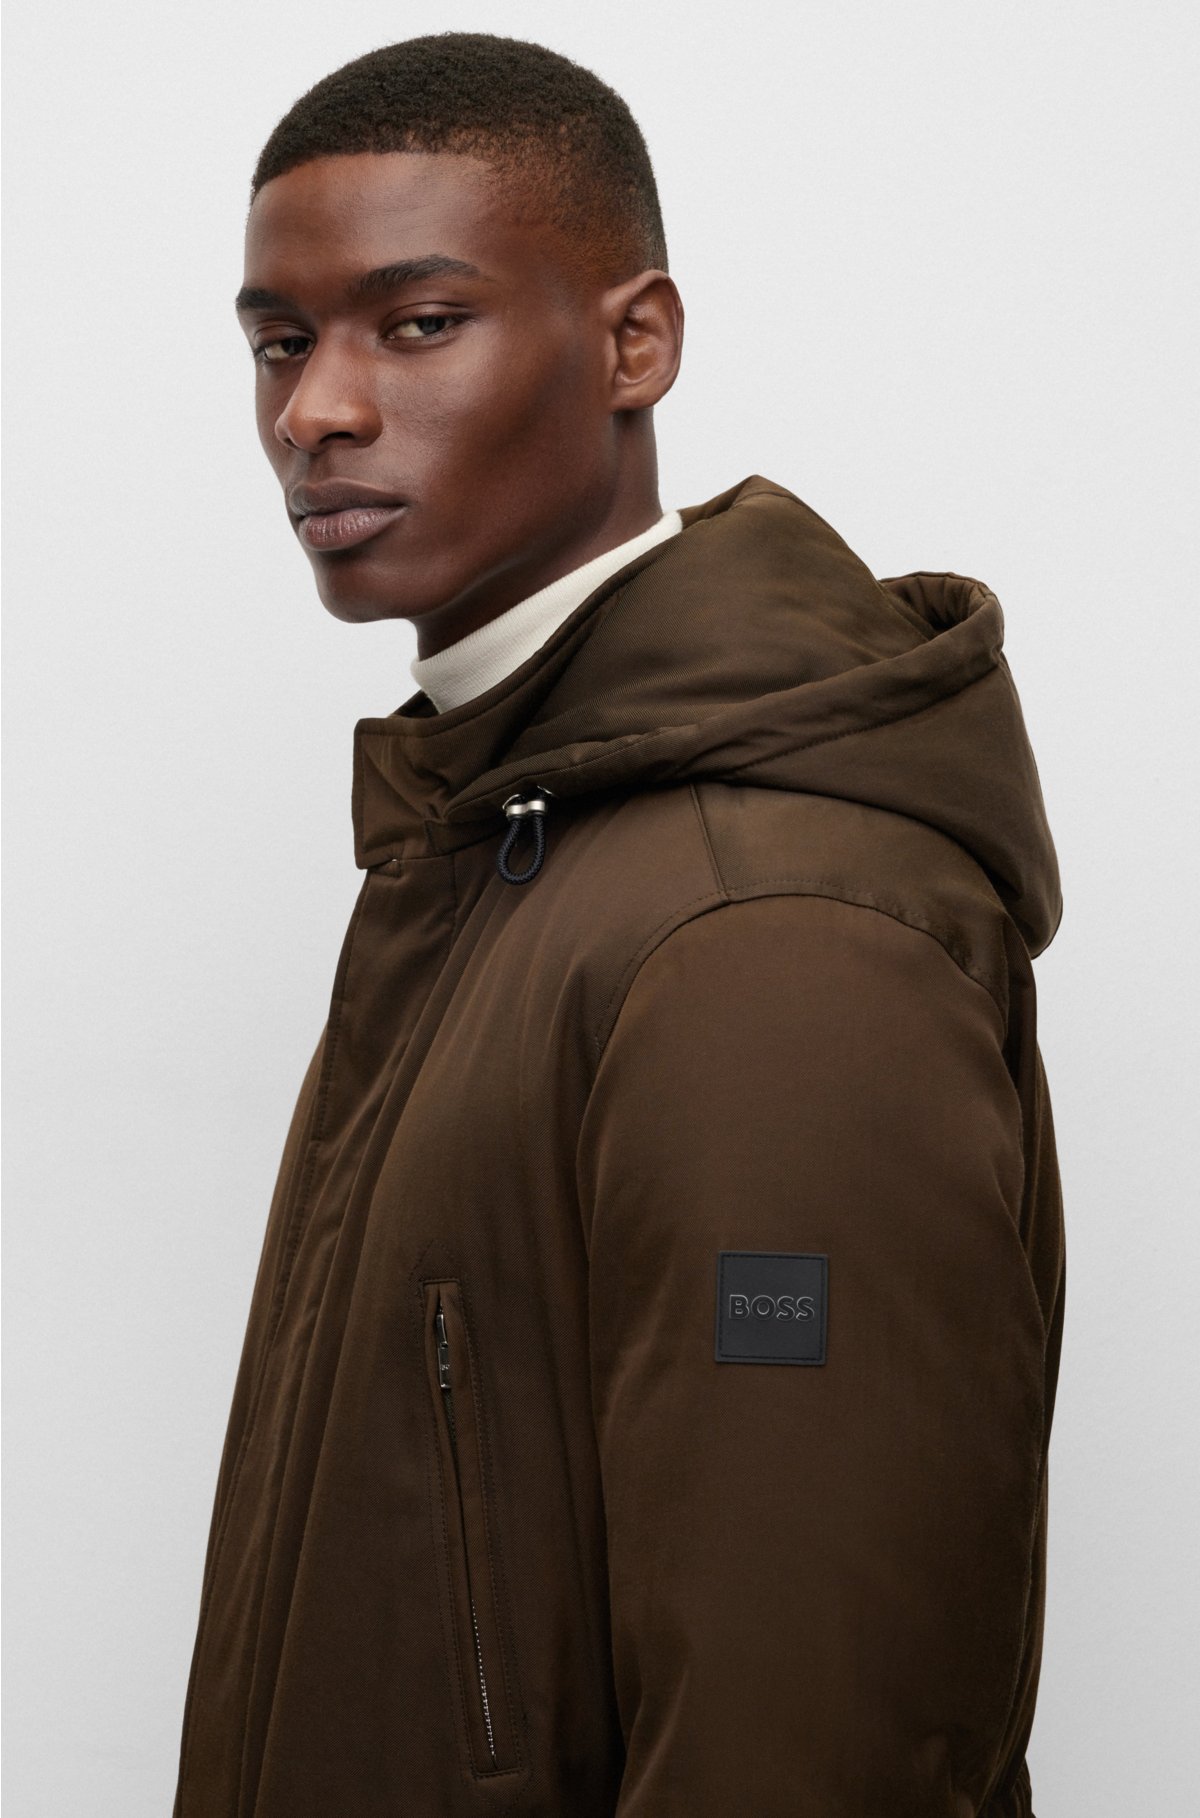 hooded logo BOSS jacket - patch with Down-filled